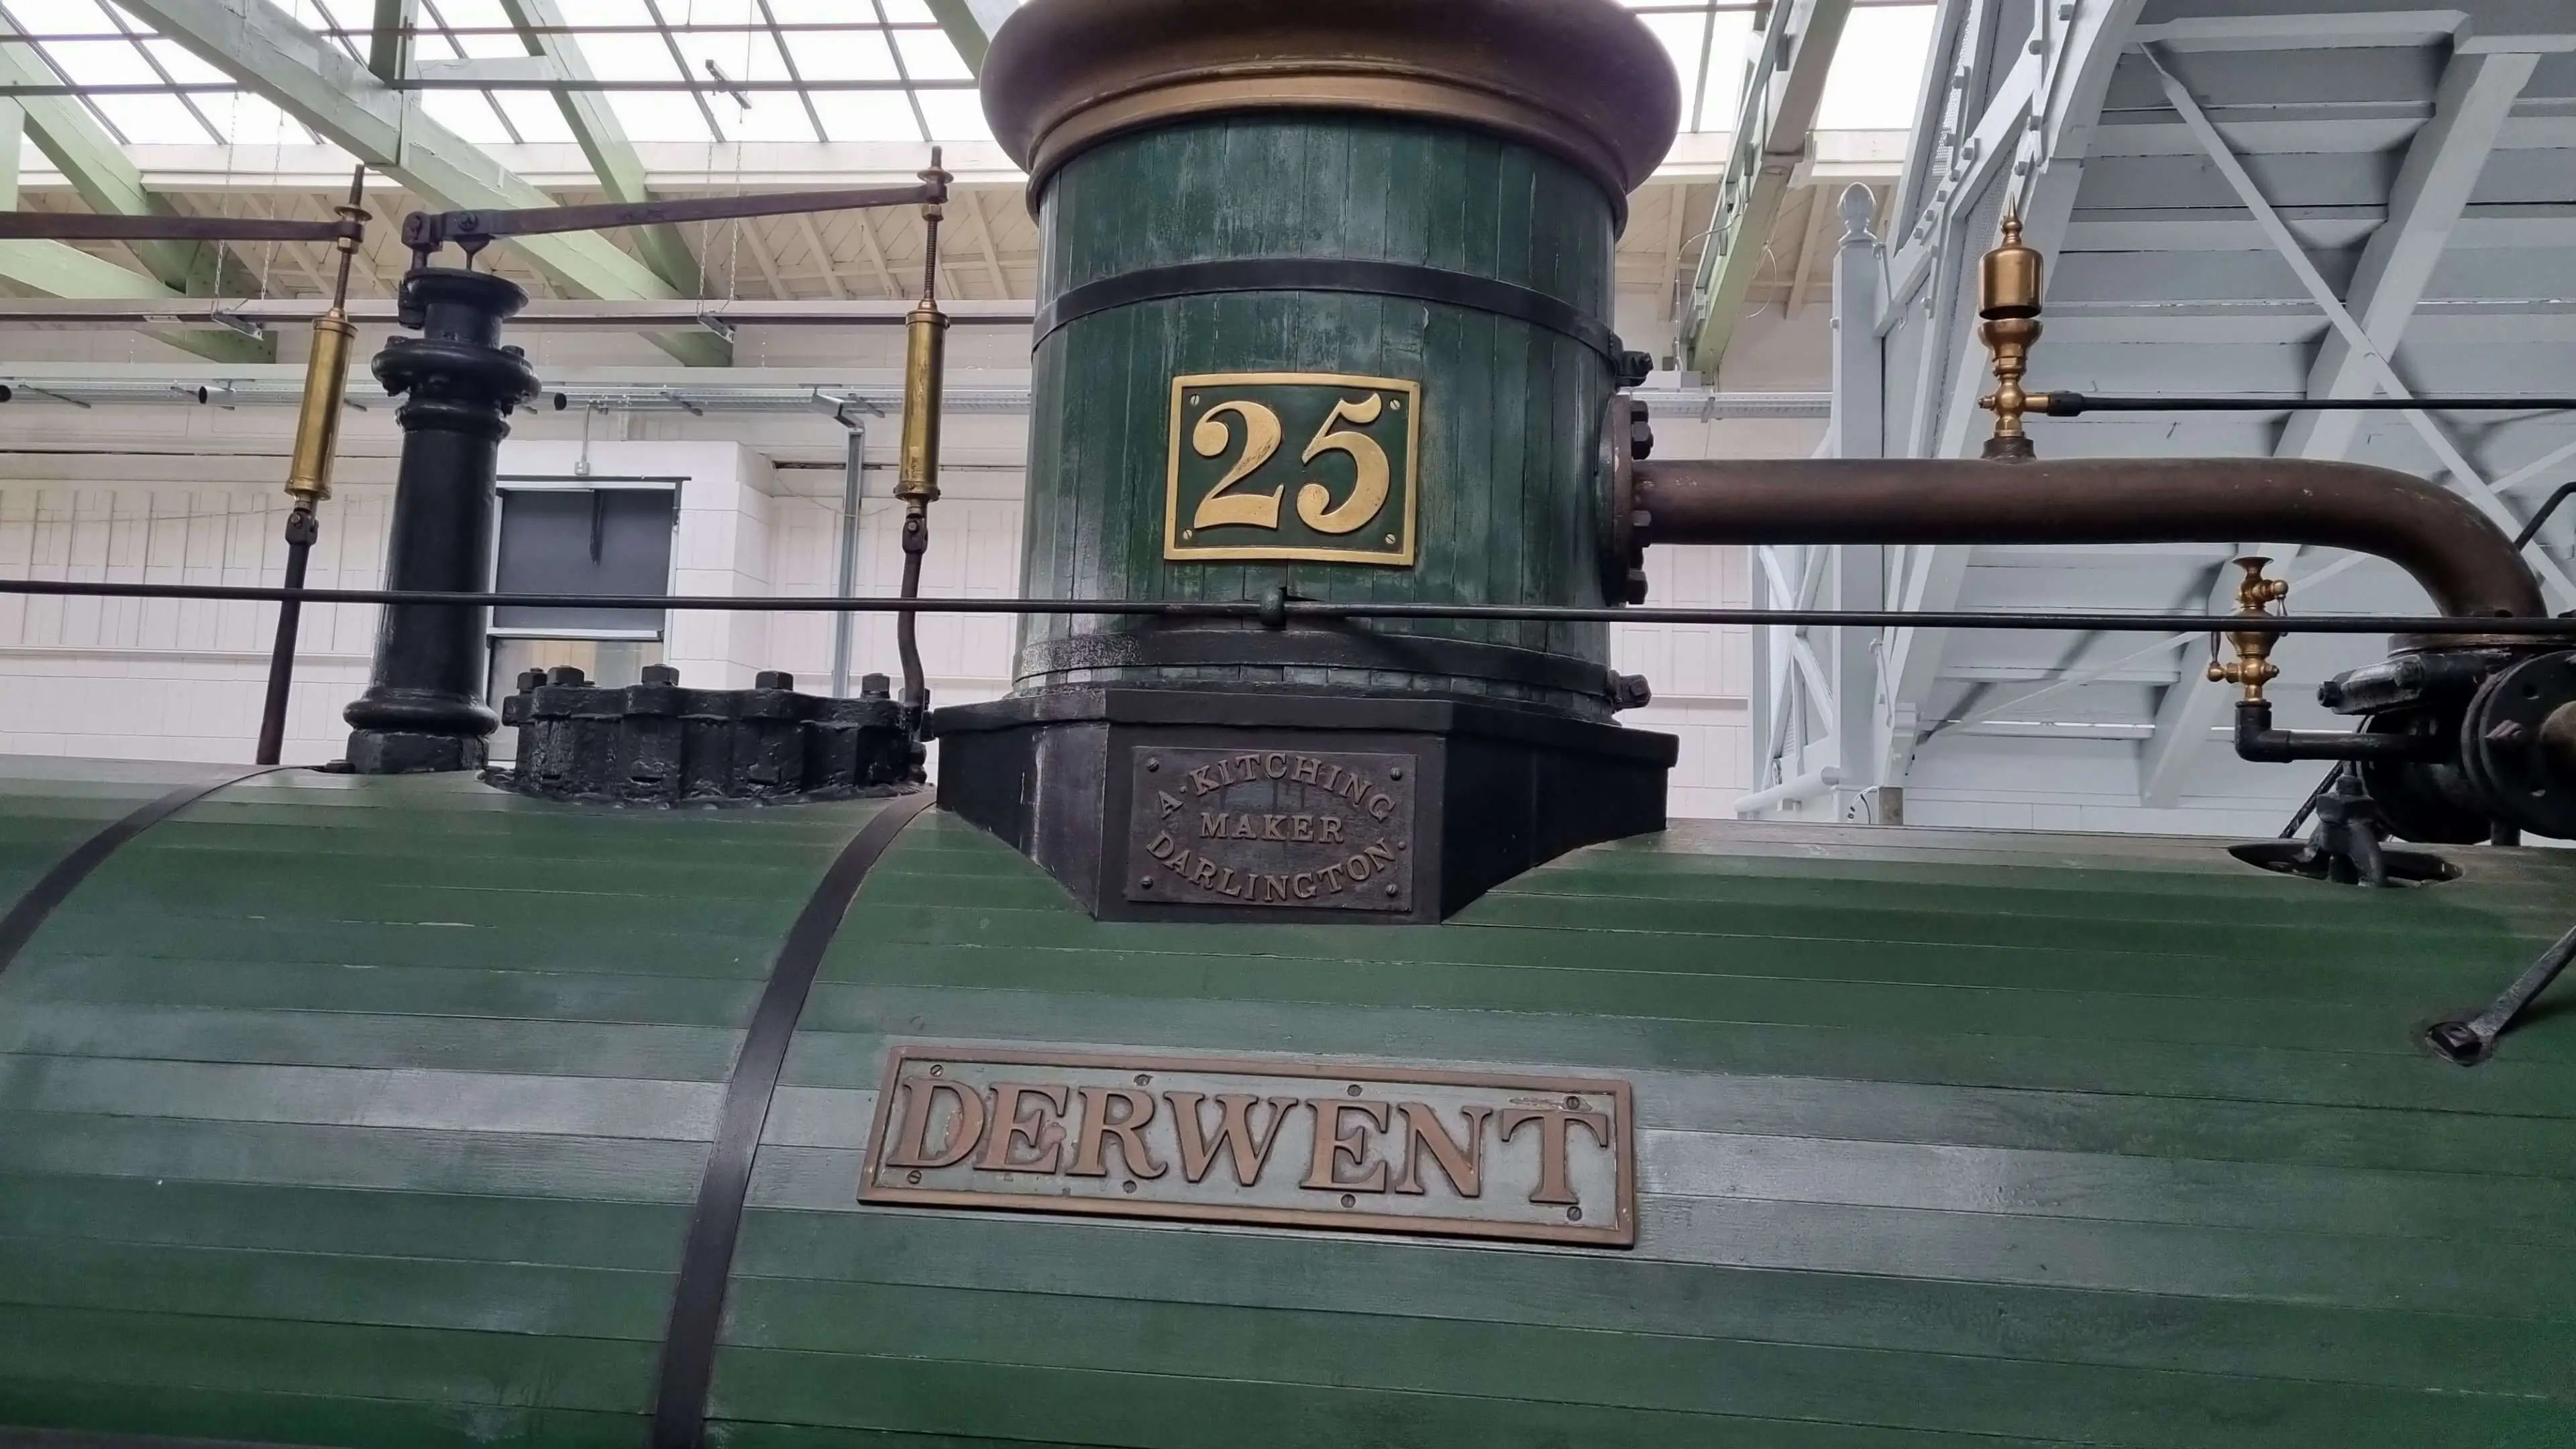 Image of the locomotive Derwent's number and name plate